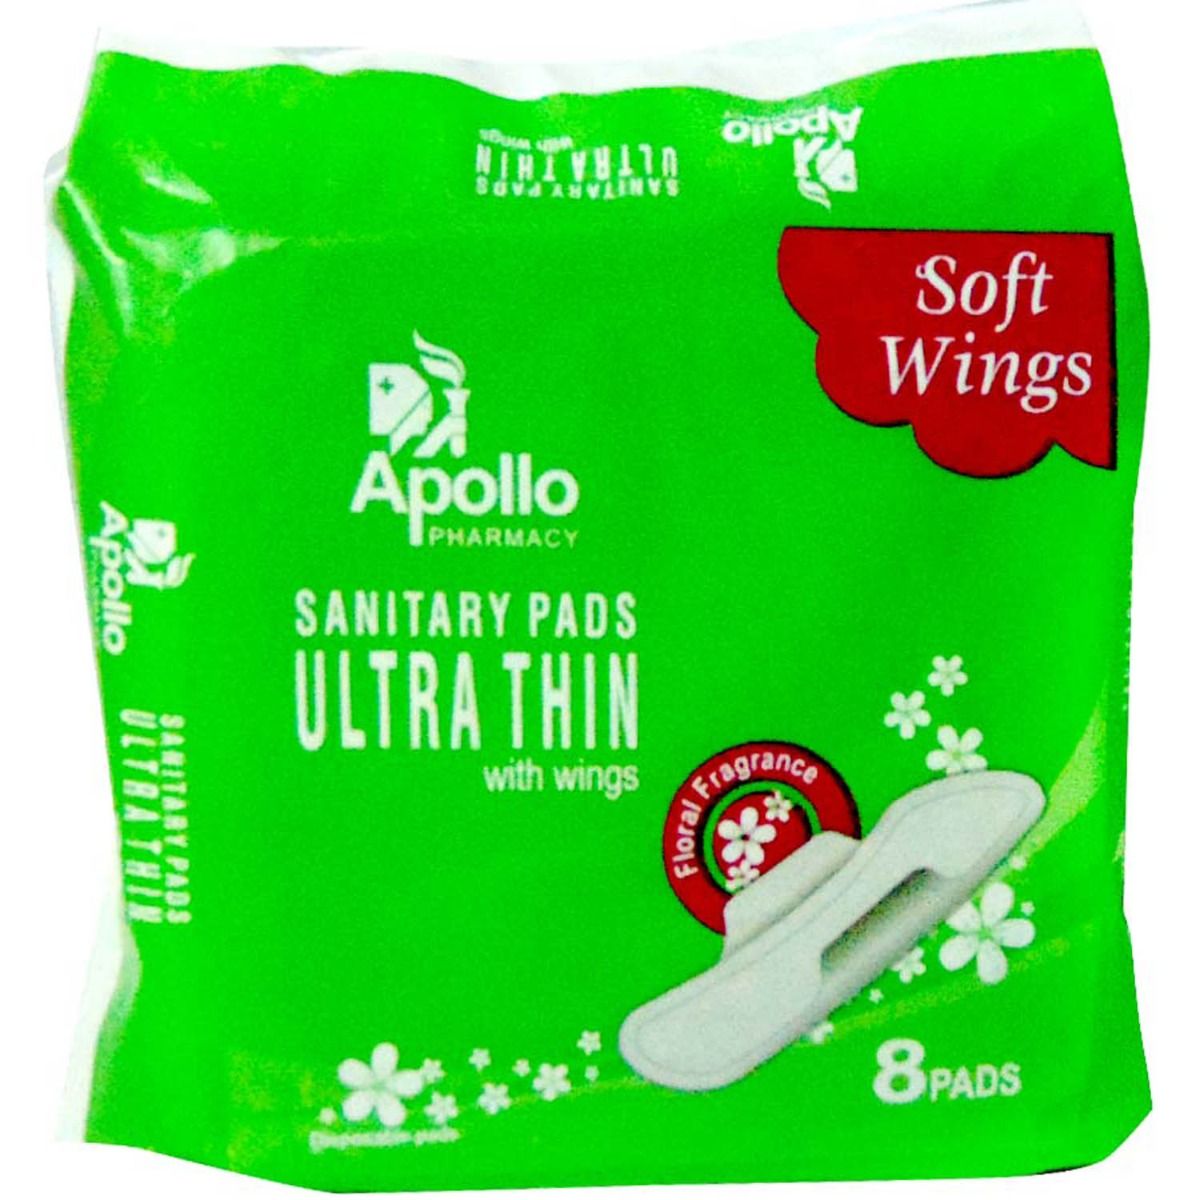 Buy Apollo Pharmacy Sanitary Pads Ultrathin with Wings, 8 Count Online